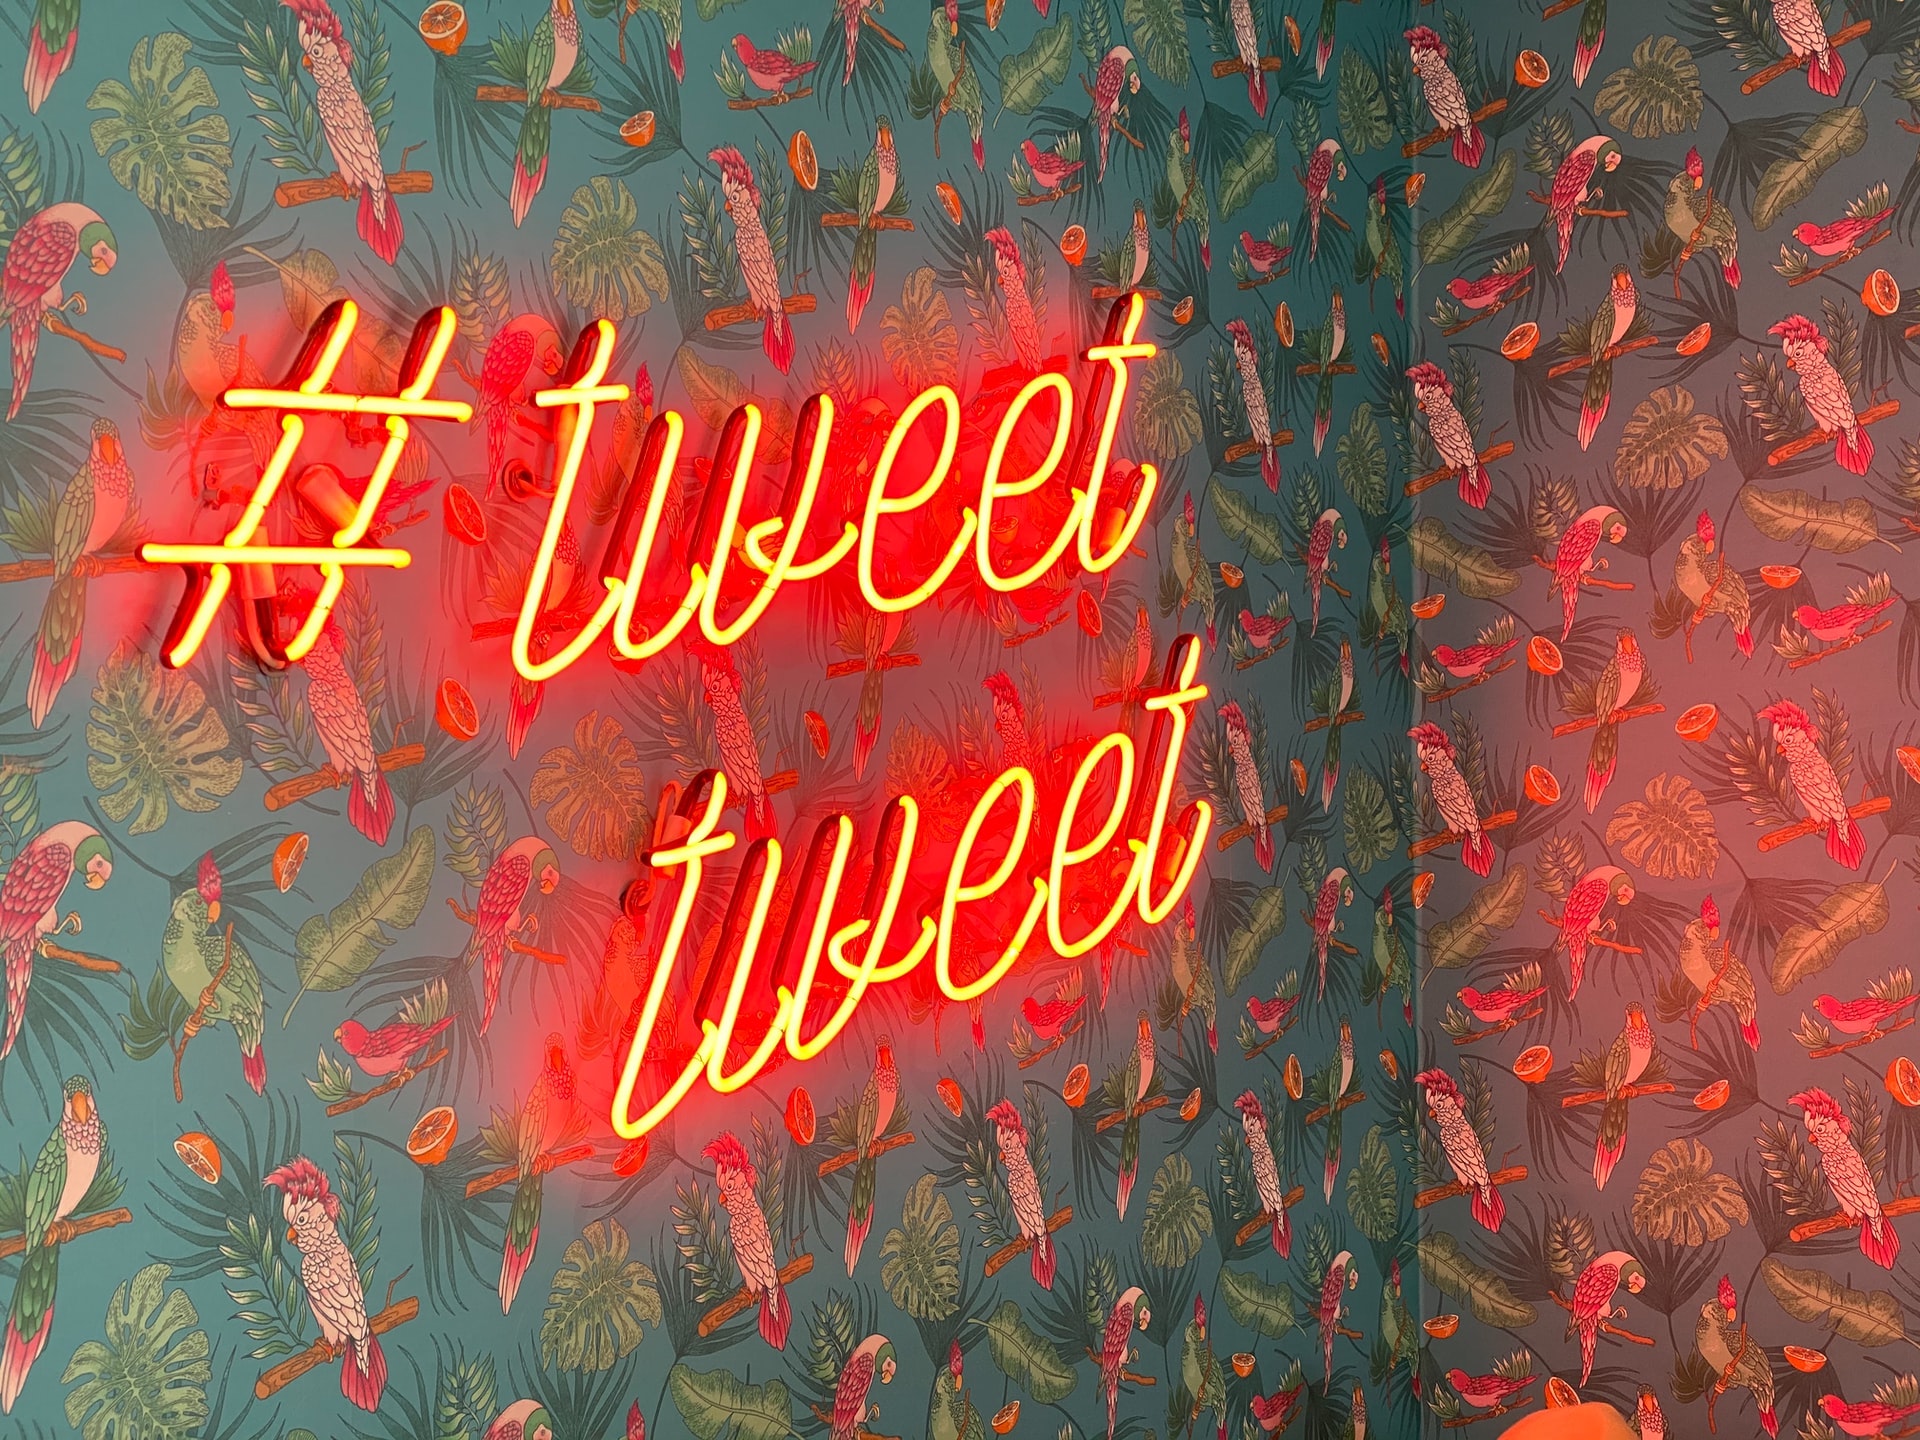 The pros and cons of finally getting an edit button on Twitter